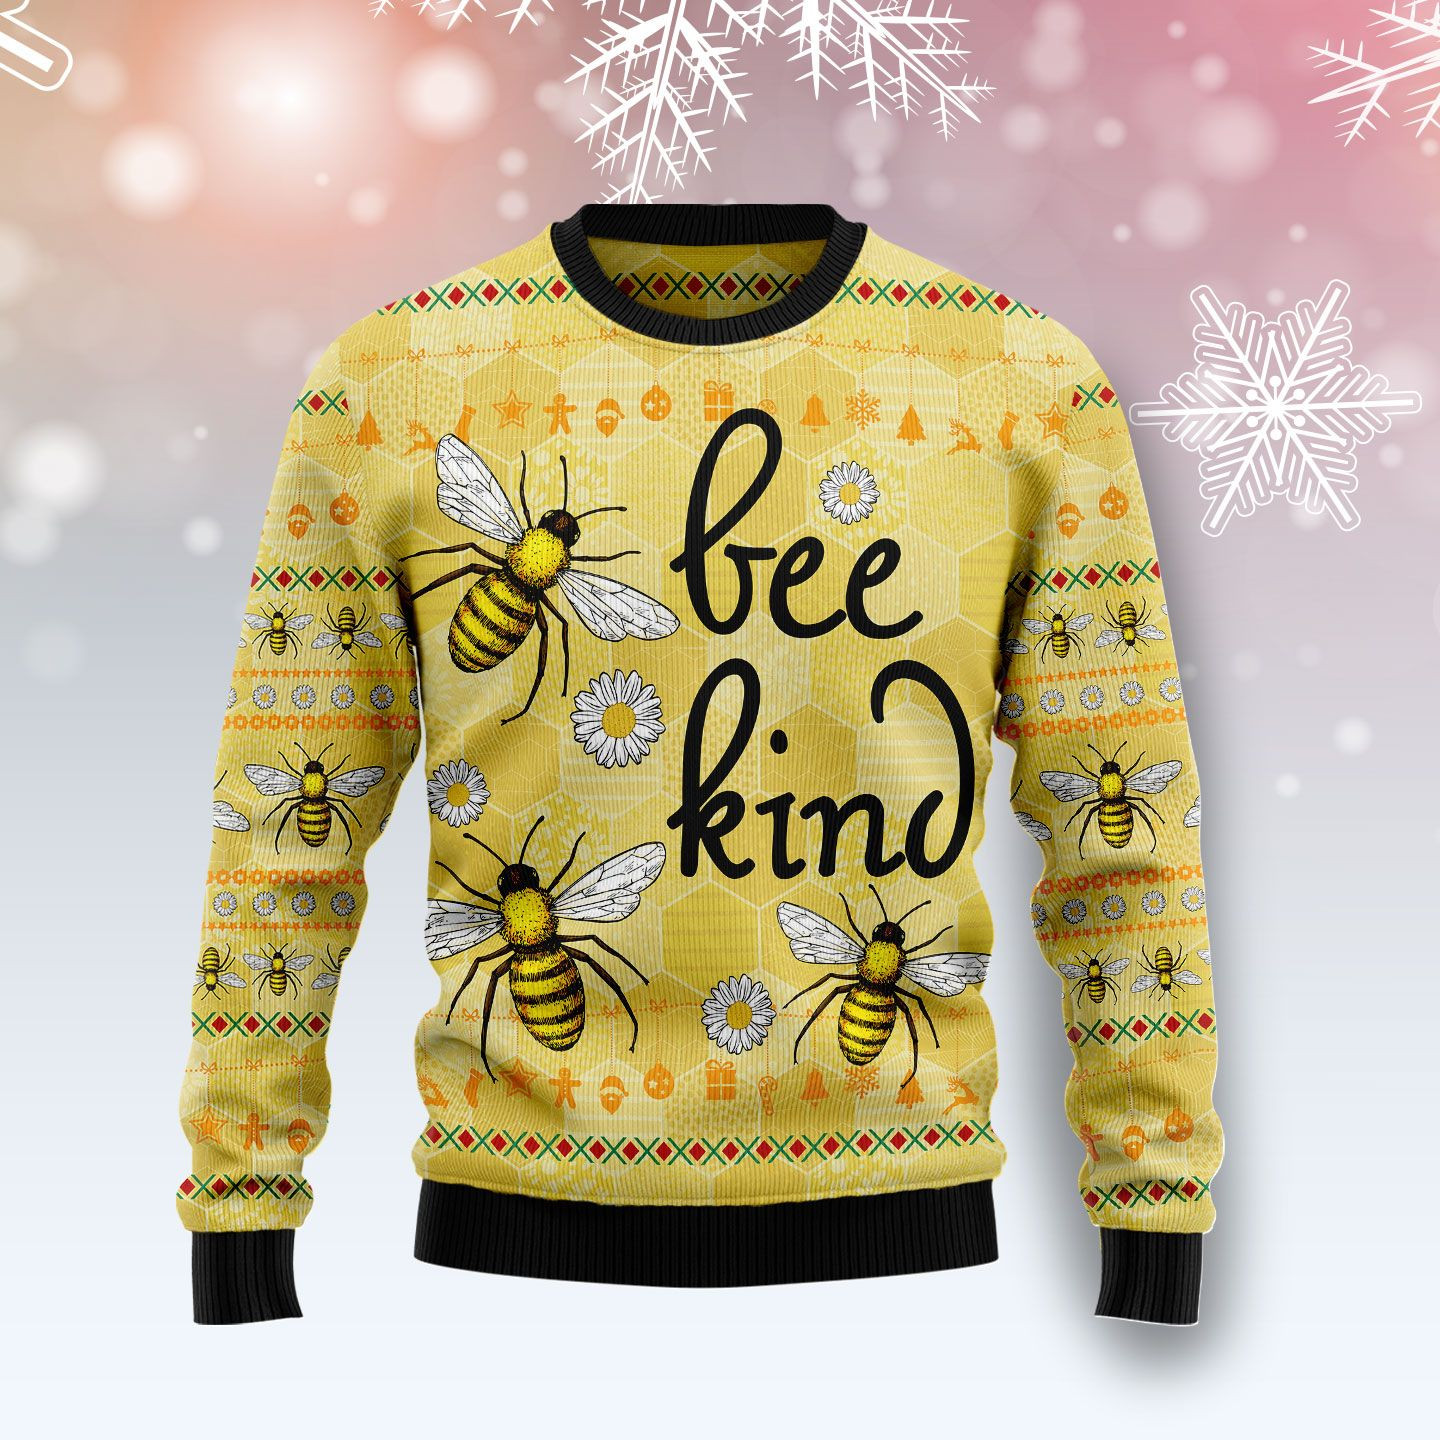 Bee Kind Ugly Christmas Sweater Ugly Sweater For Men Women, Holiday Sweater